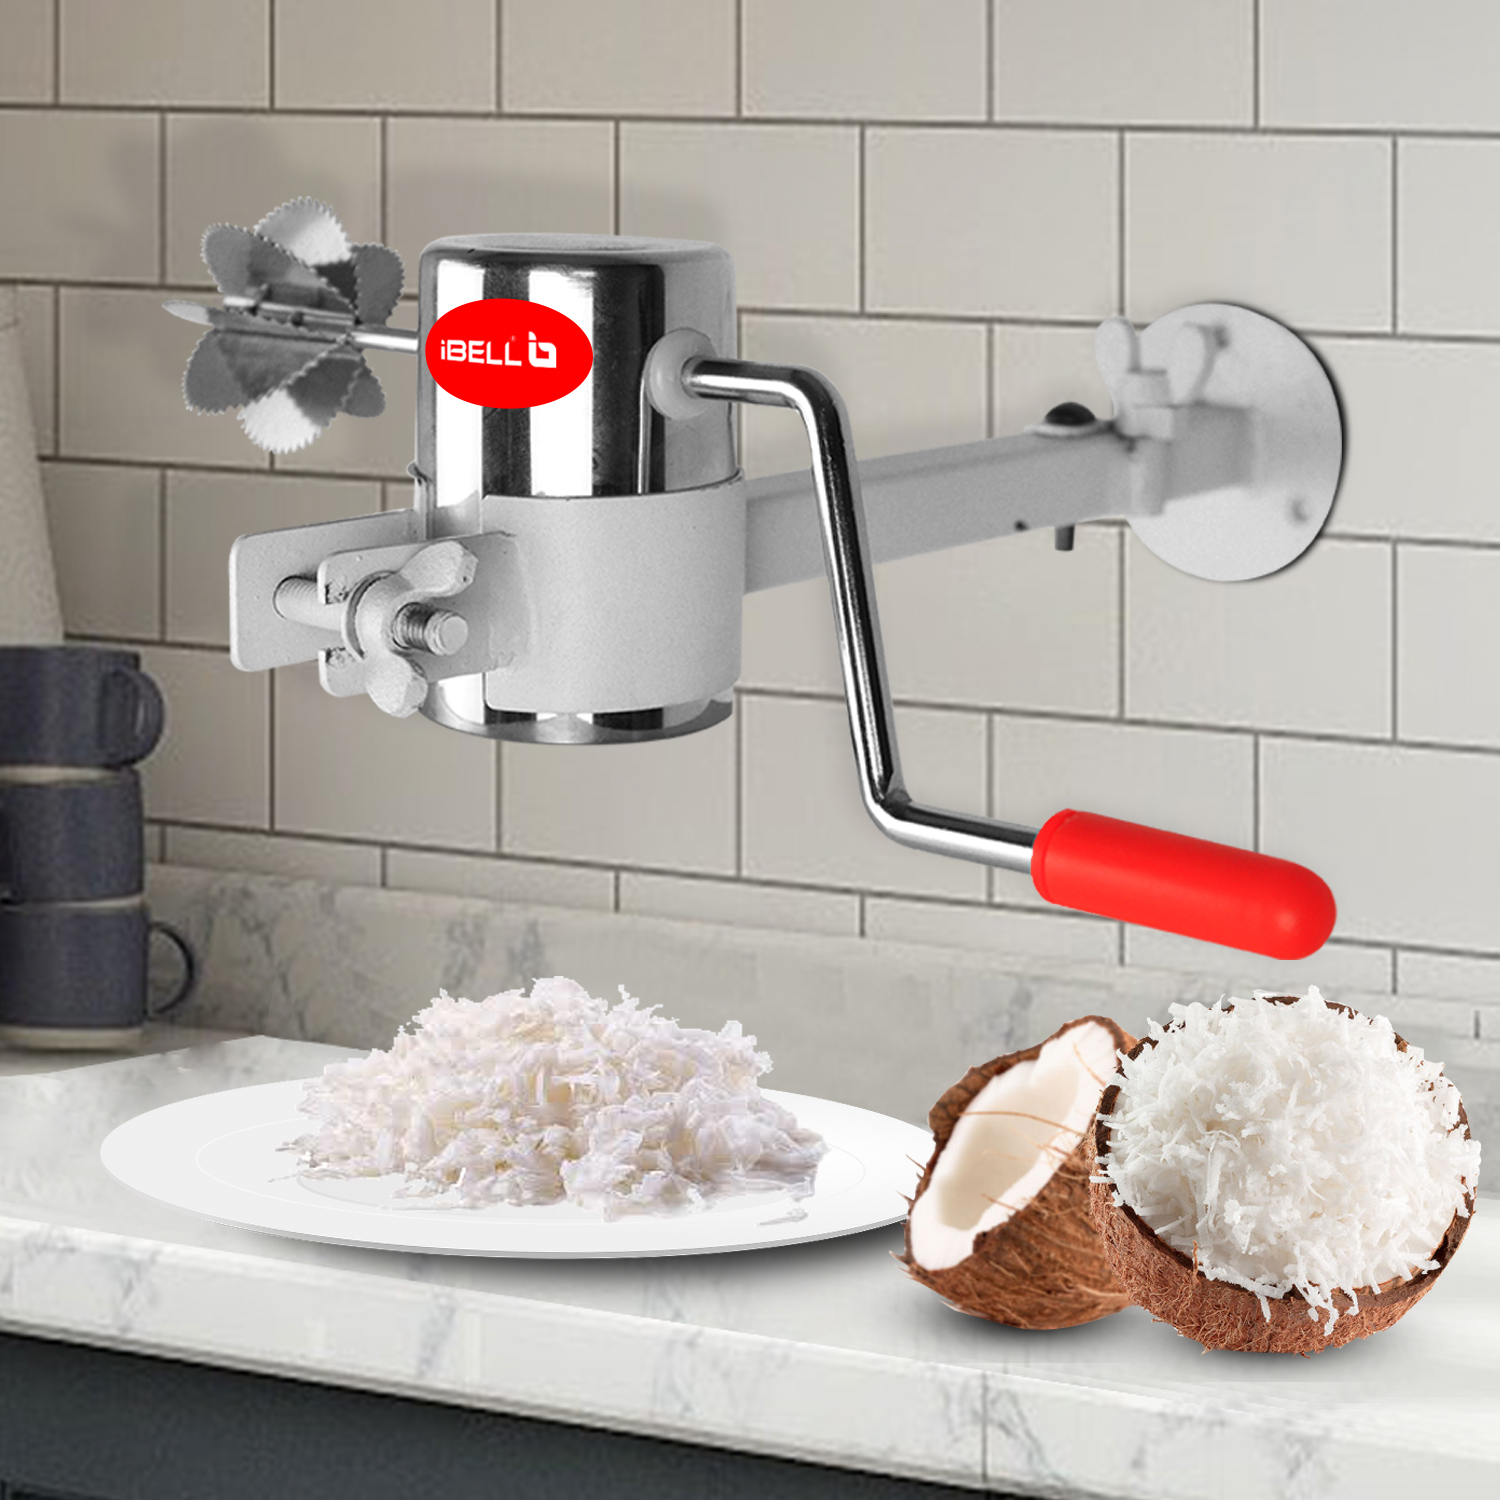 Ibell 2 in 1 coconut scraper with multipurpose foldable wall mount stand  stainless steel with rotating handle